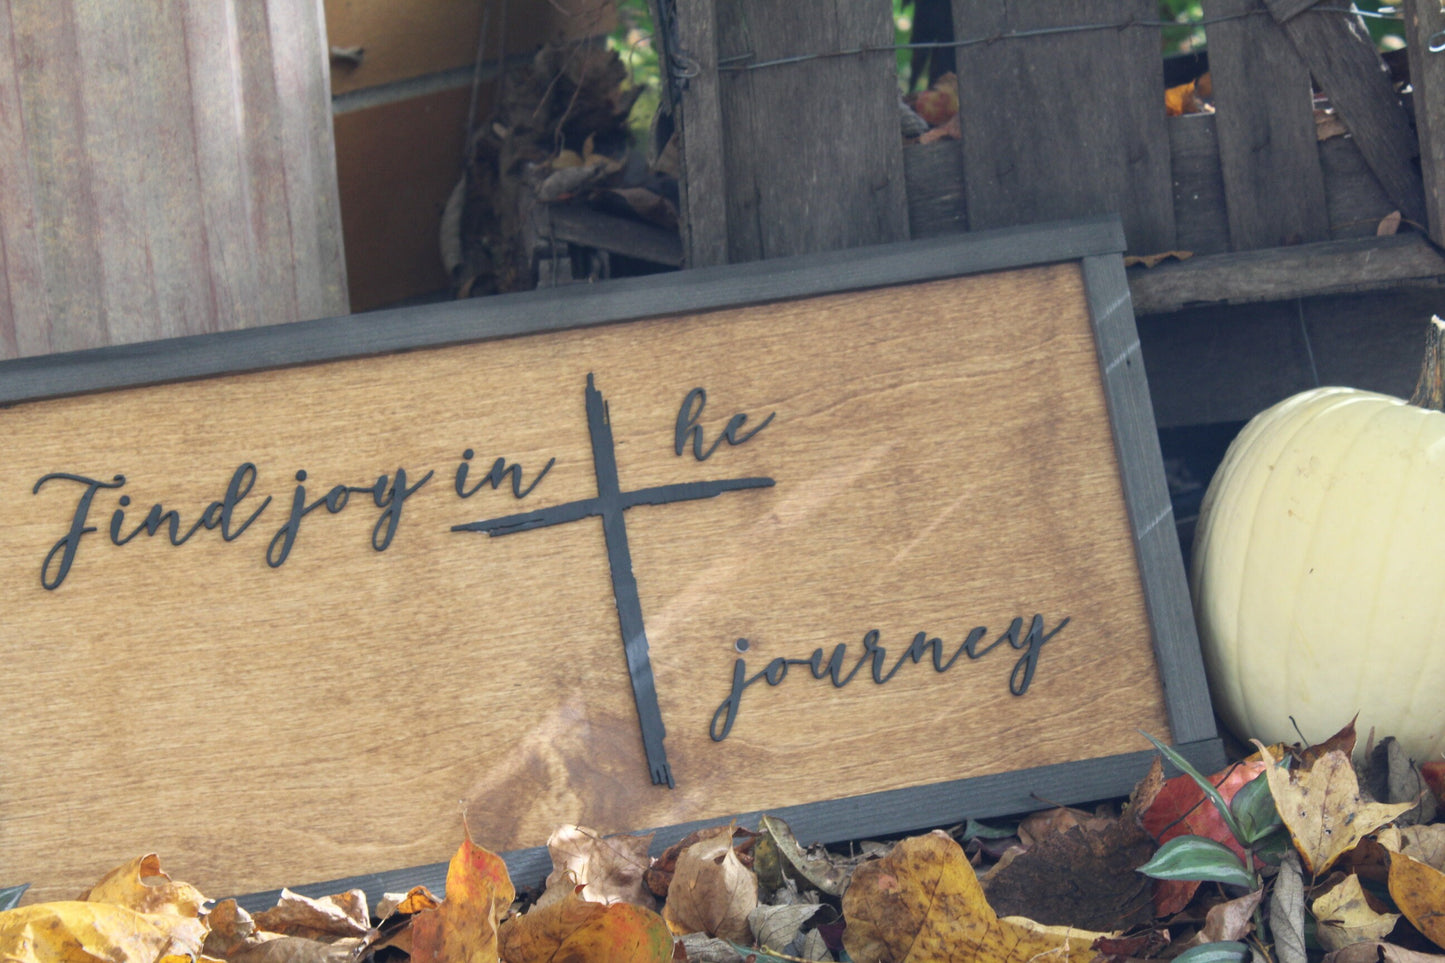 Find Joy In The Journey Decor Relax Rustic Vintge Guest Raised 3D Wood Decor Sign Qoute Cross Faith 3D Raised off the board Handmade